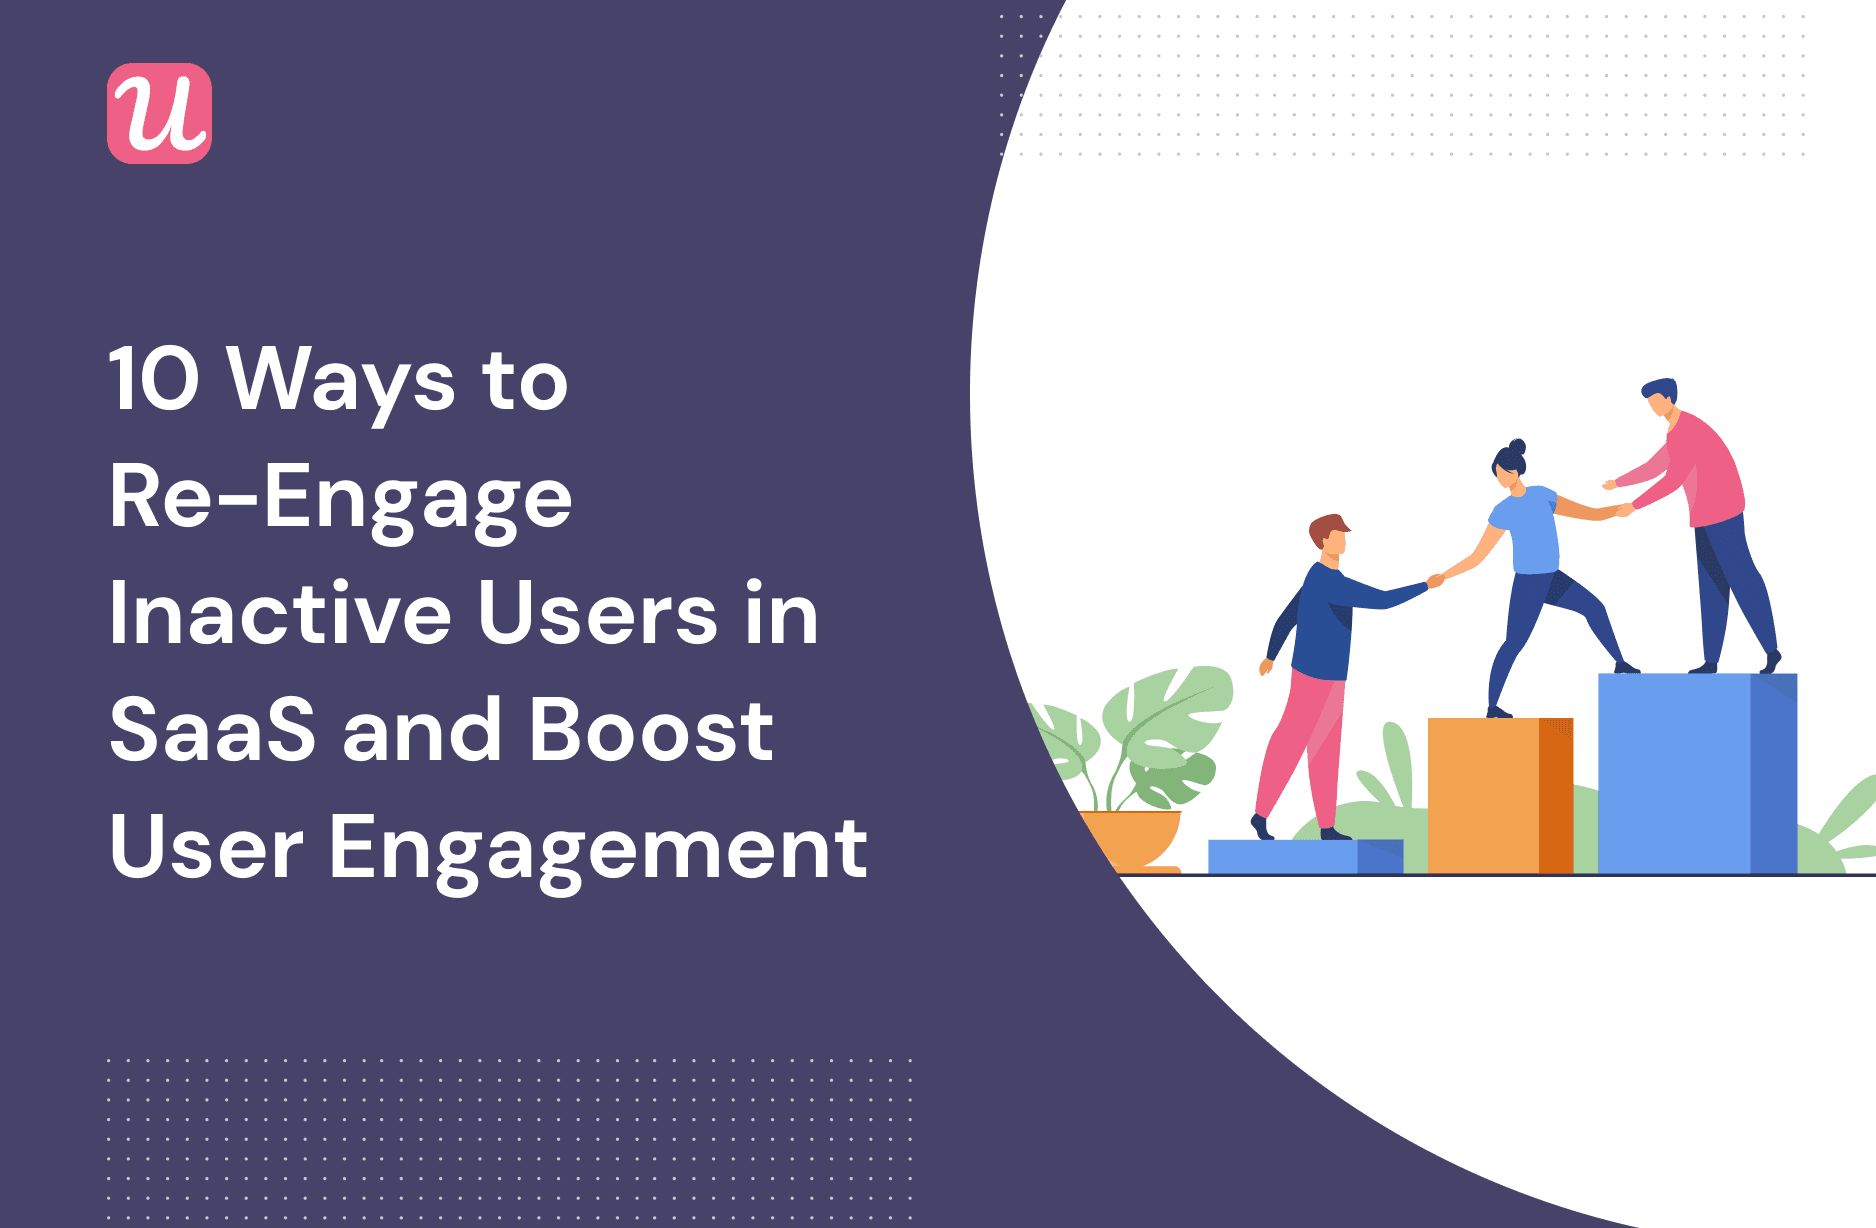 10 Ways to Re-engage Inactive Users in SaaS and Boost User Engagement